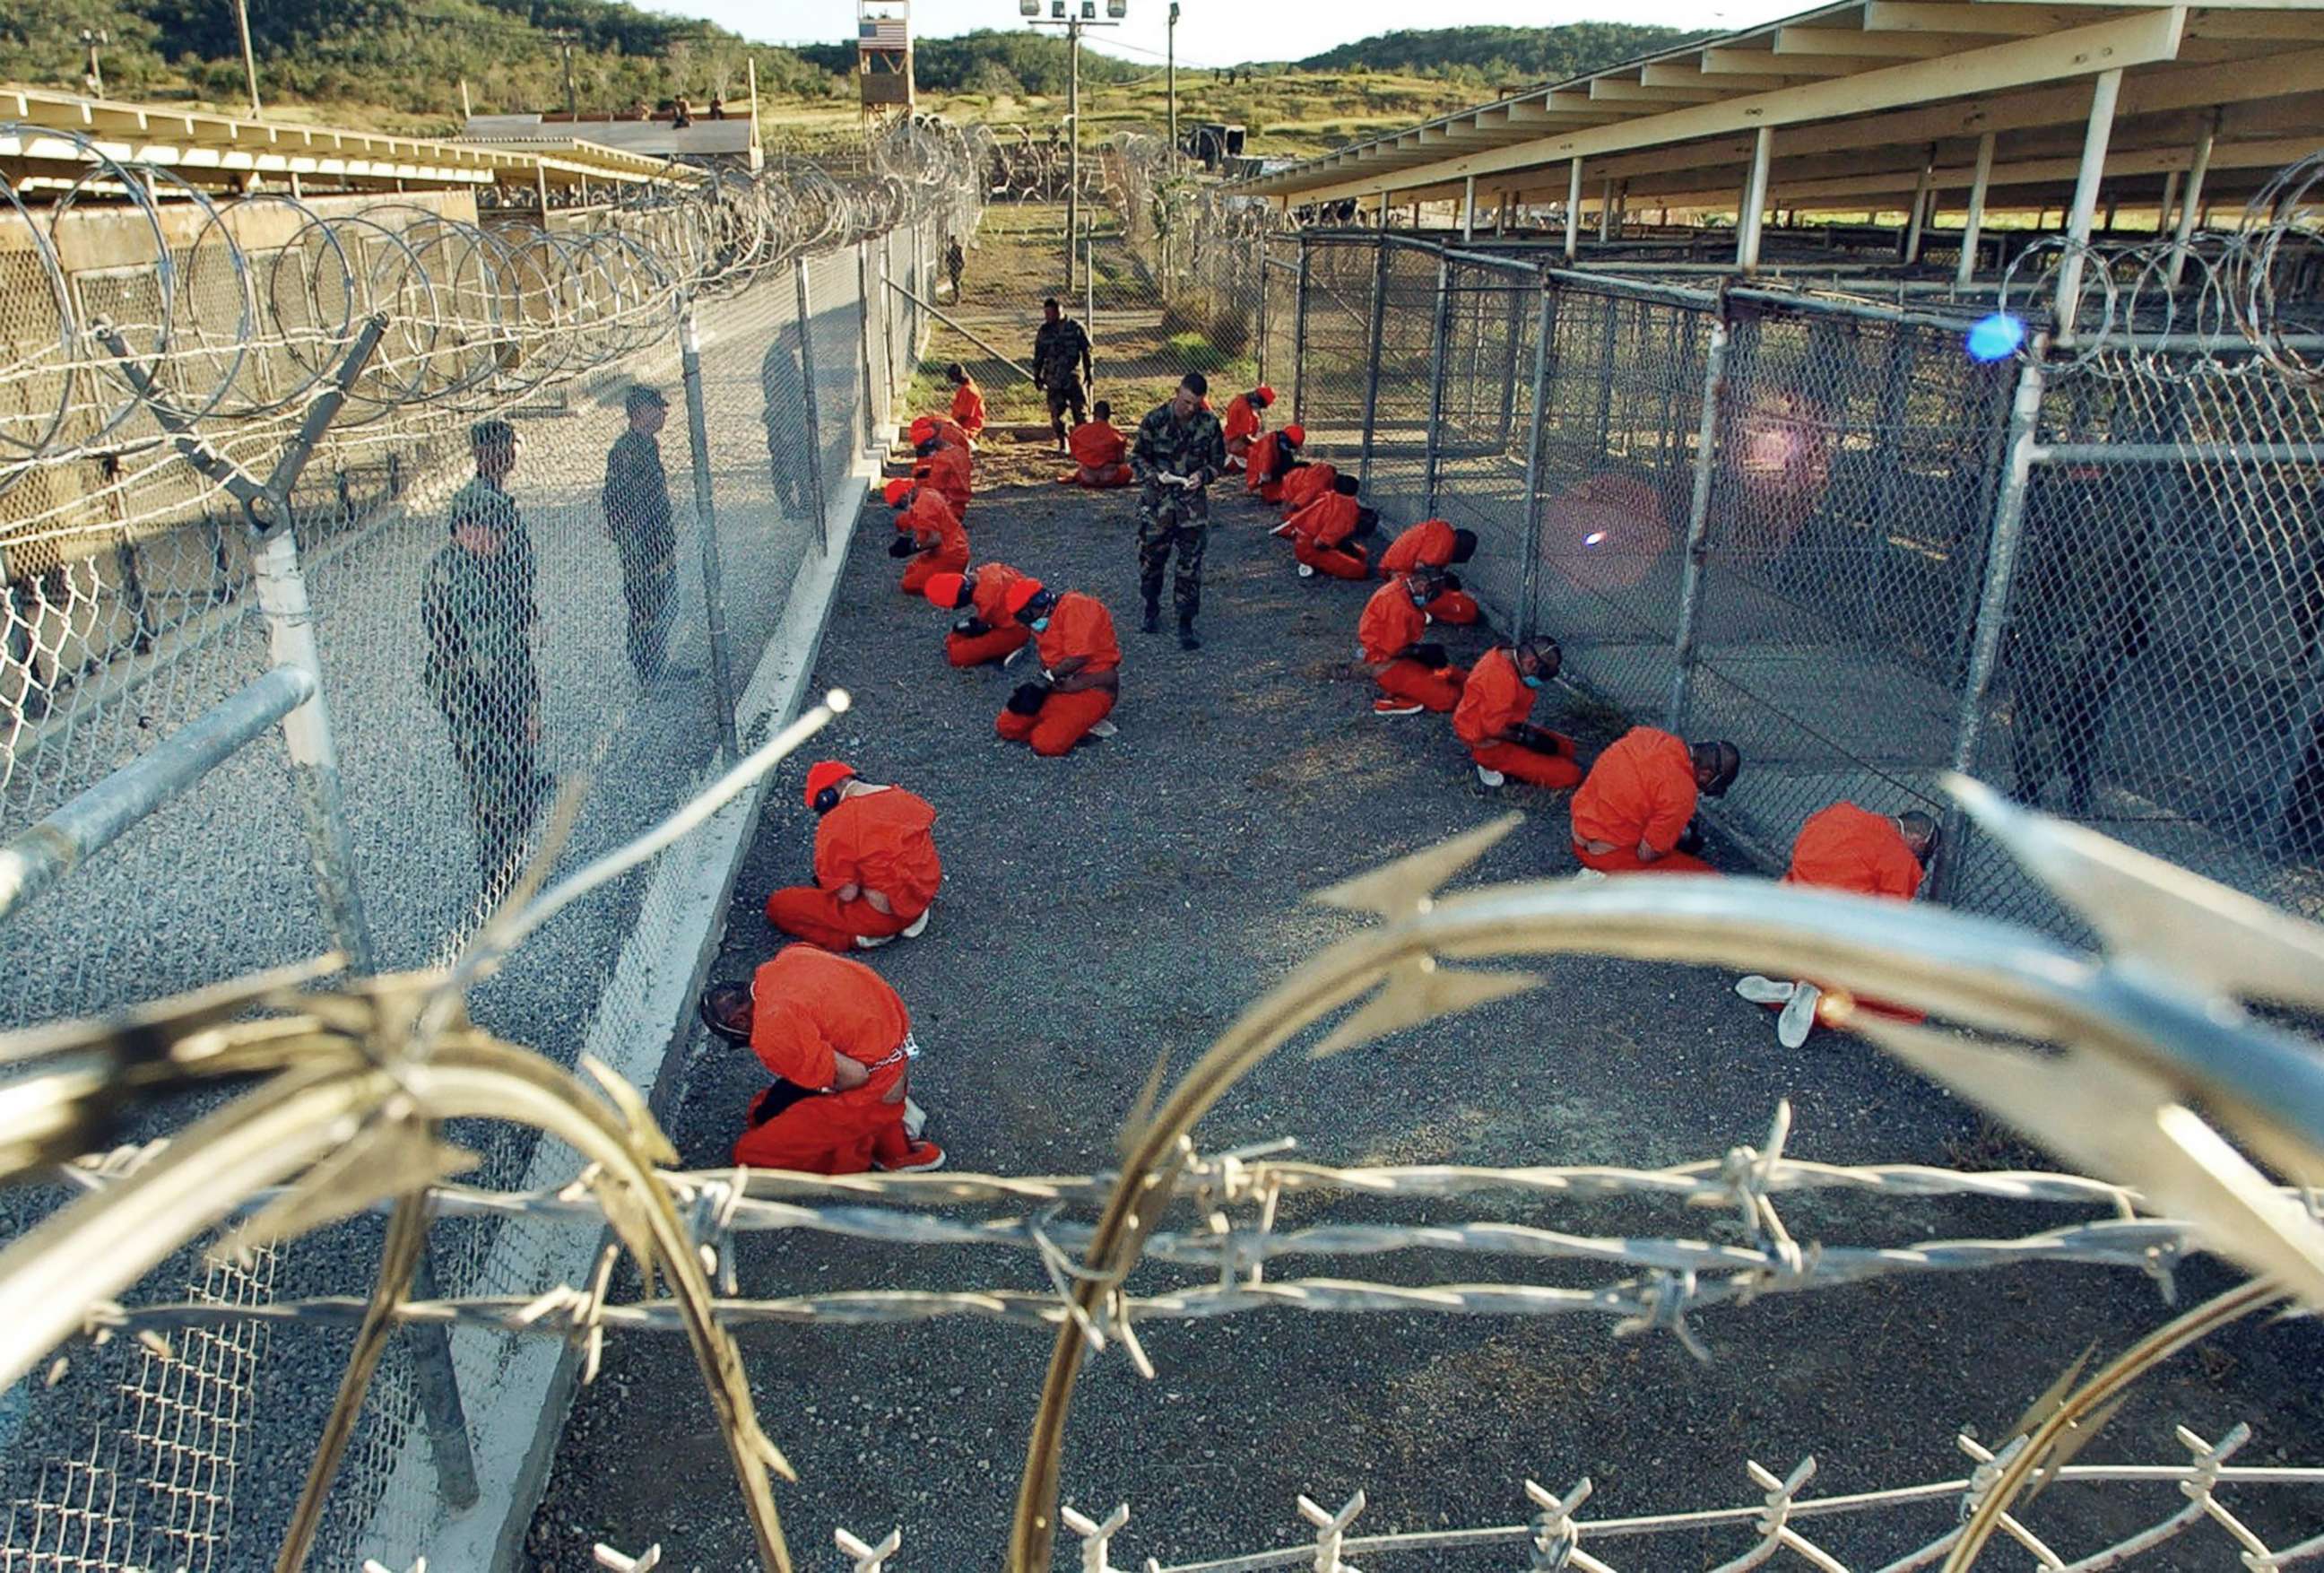 PHOTO: Detainees in orange jumpsuits sit in a holding area under the watch of U.S. military police at Camp X-Ray at Naval Base Guantanamo Bay, Cuba, during in-processing to the temporary detention facility, Jan. 11, 2002. 